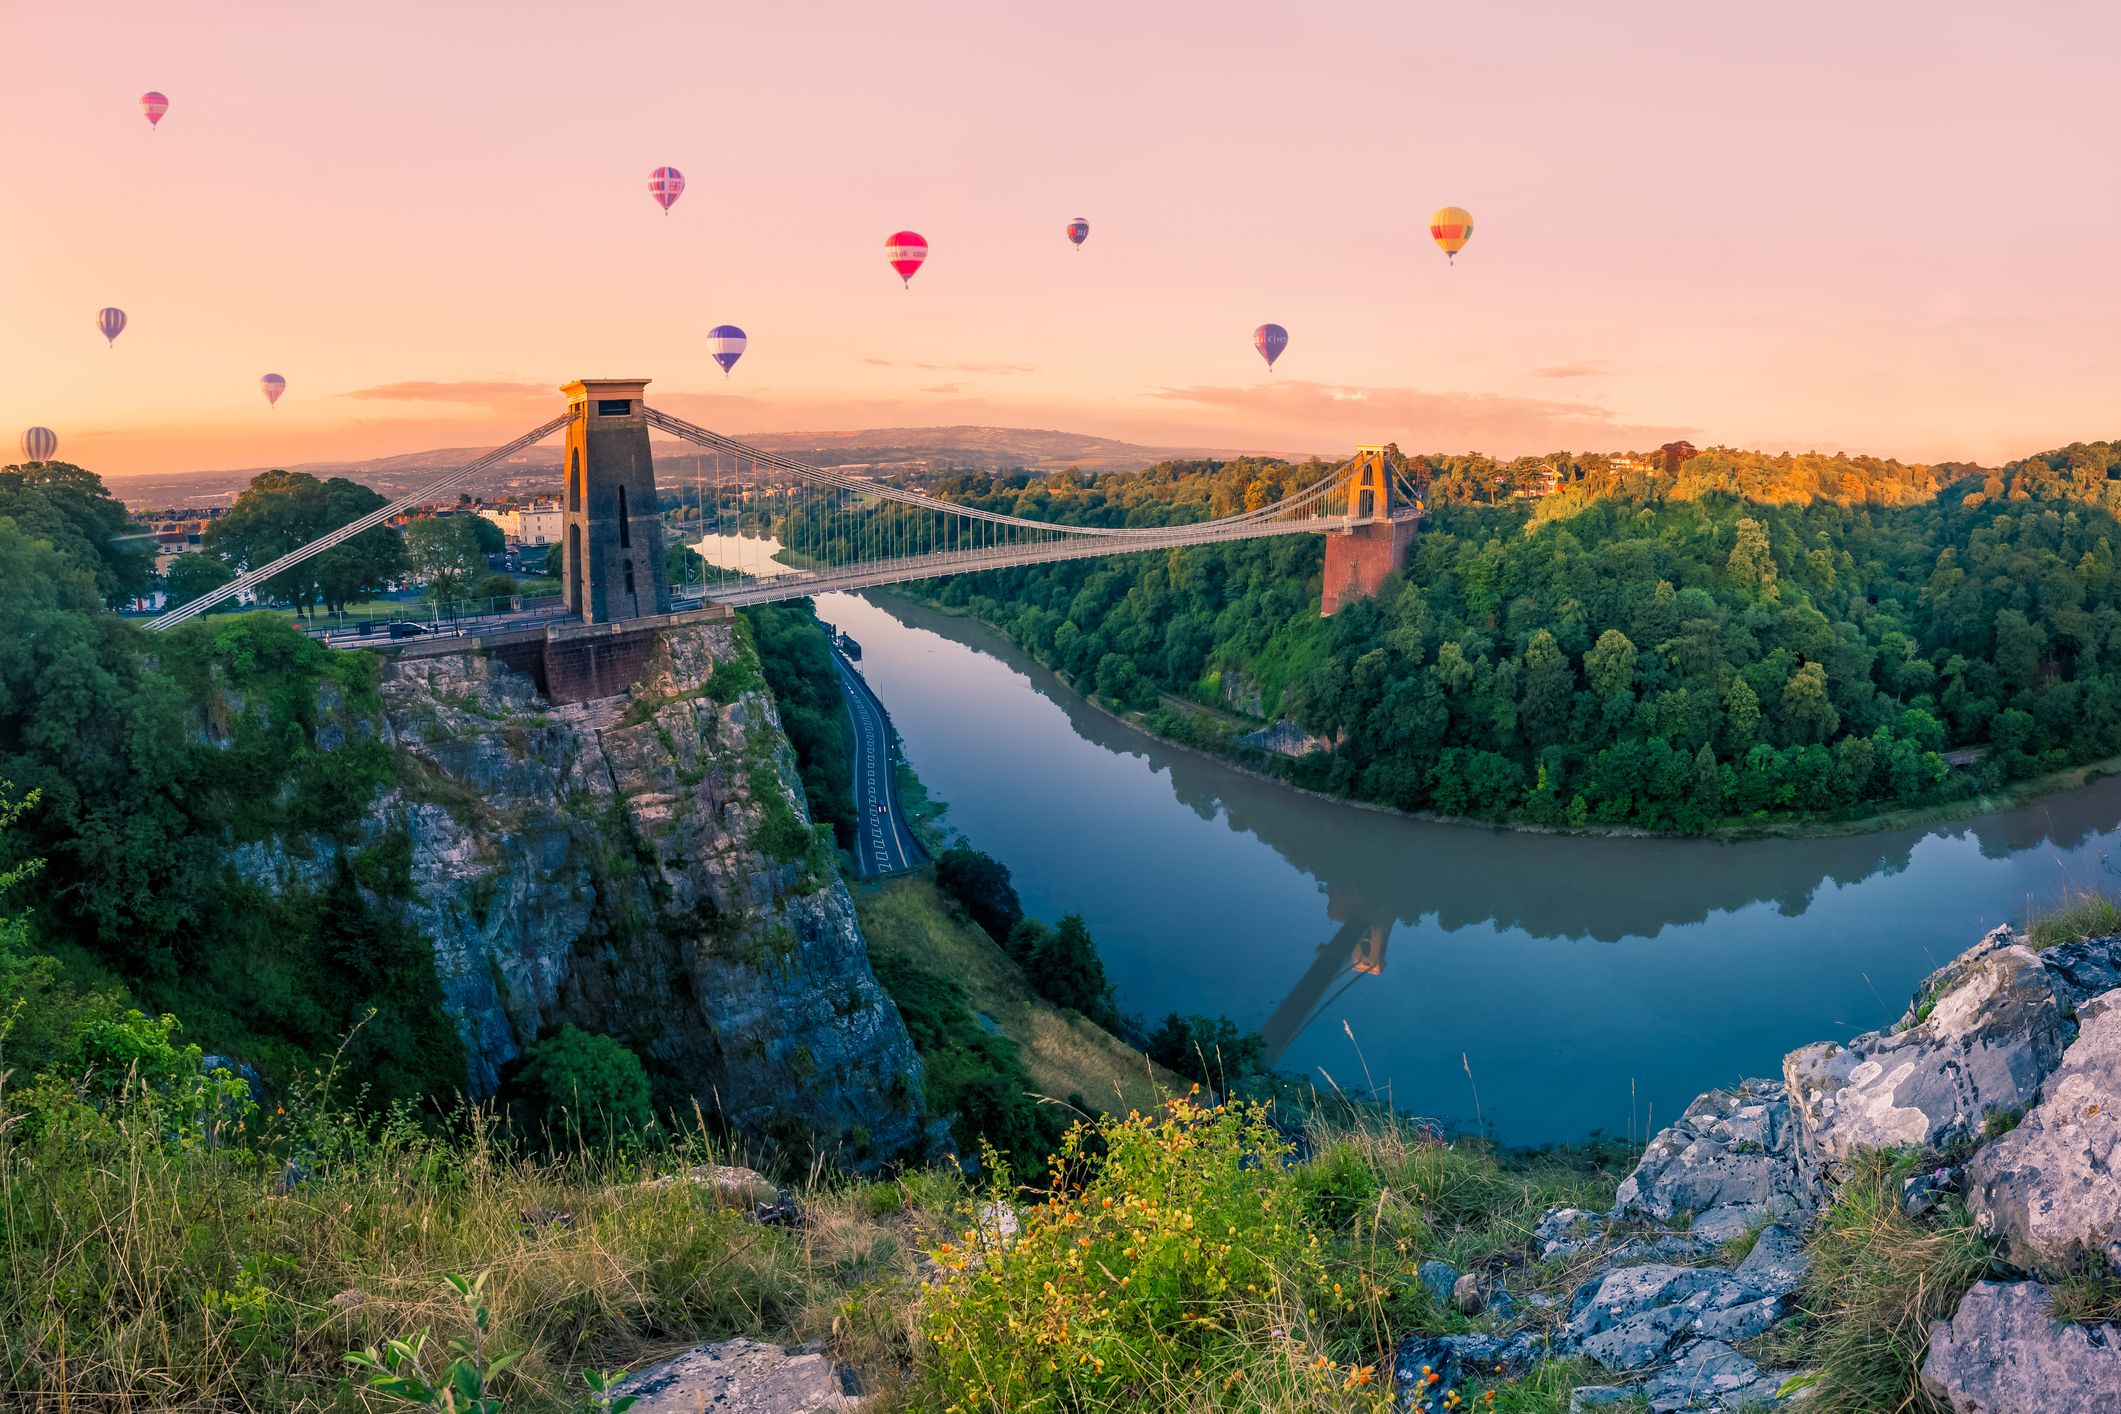 Bristol Balloon Fiesta 2019: What To See And Do